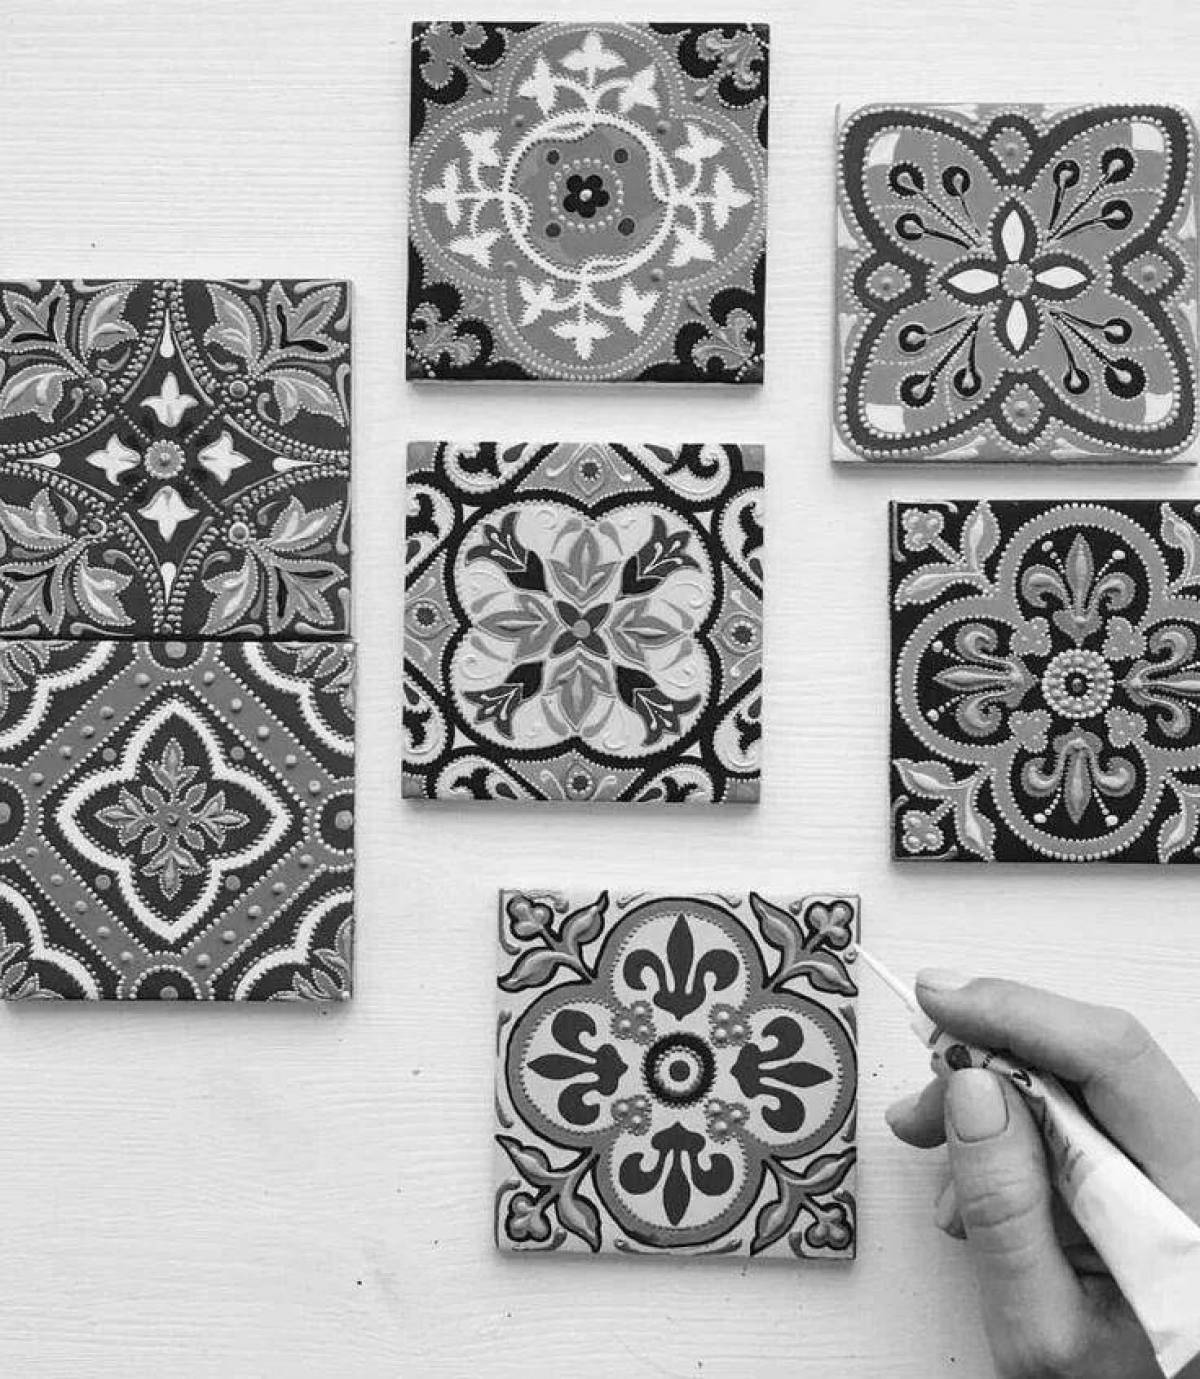 Attractive coloring of ceramic tiles